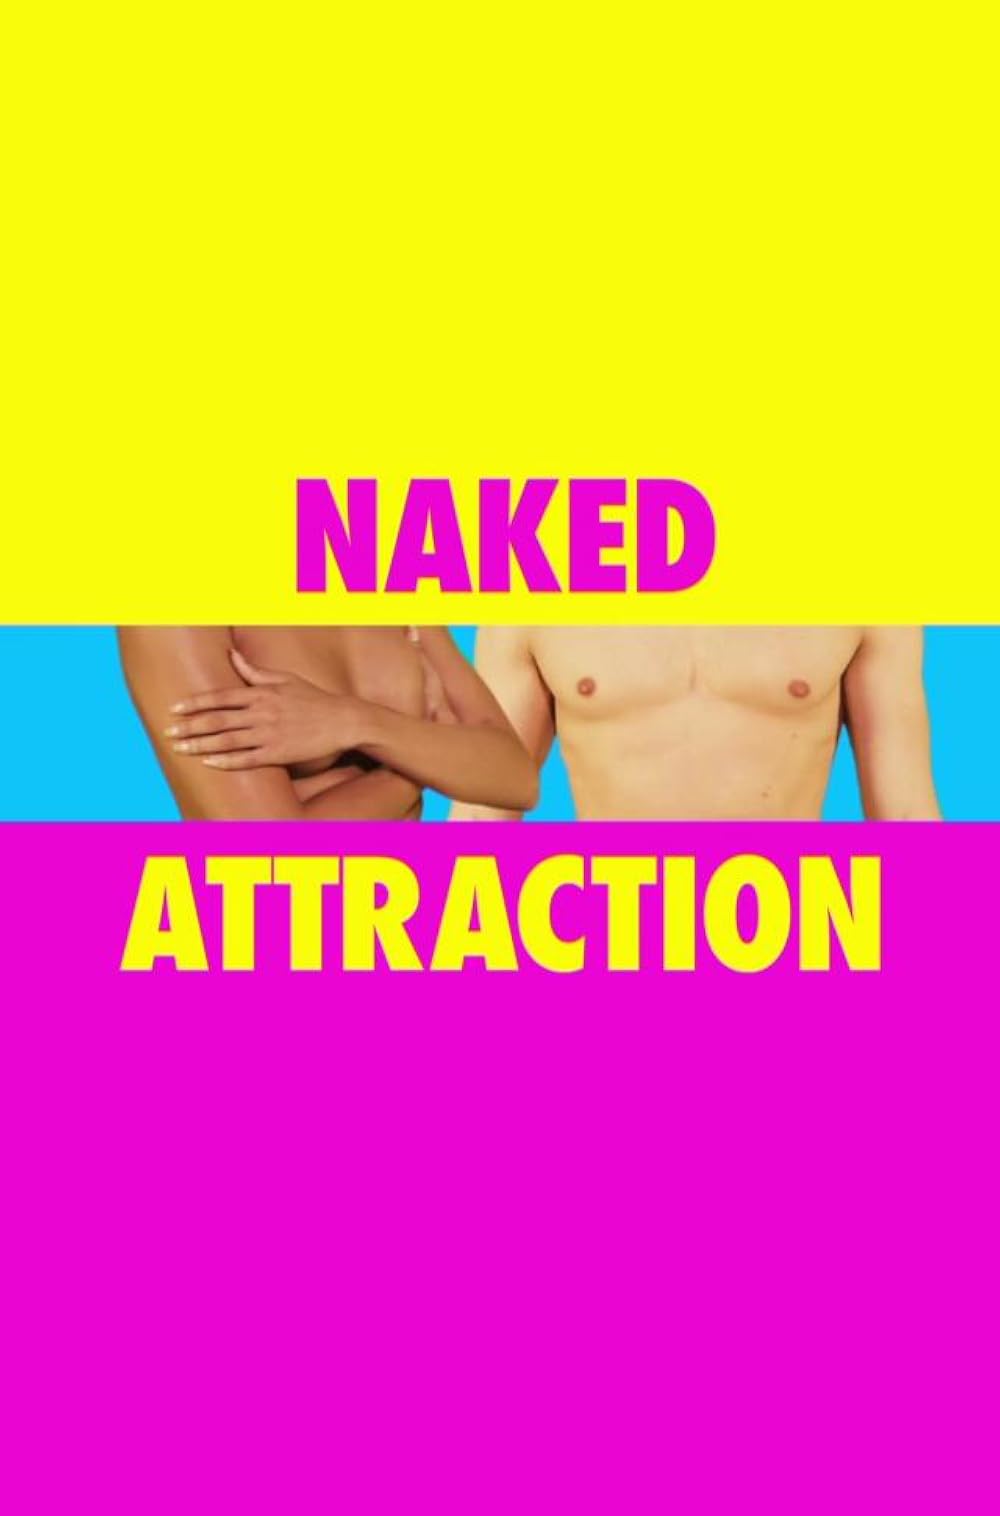 courtney said recommends Naked Attraction Dating Hautnah